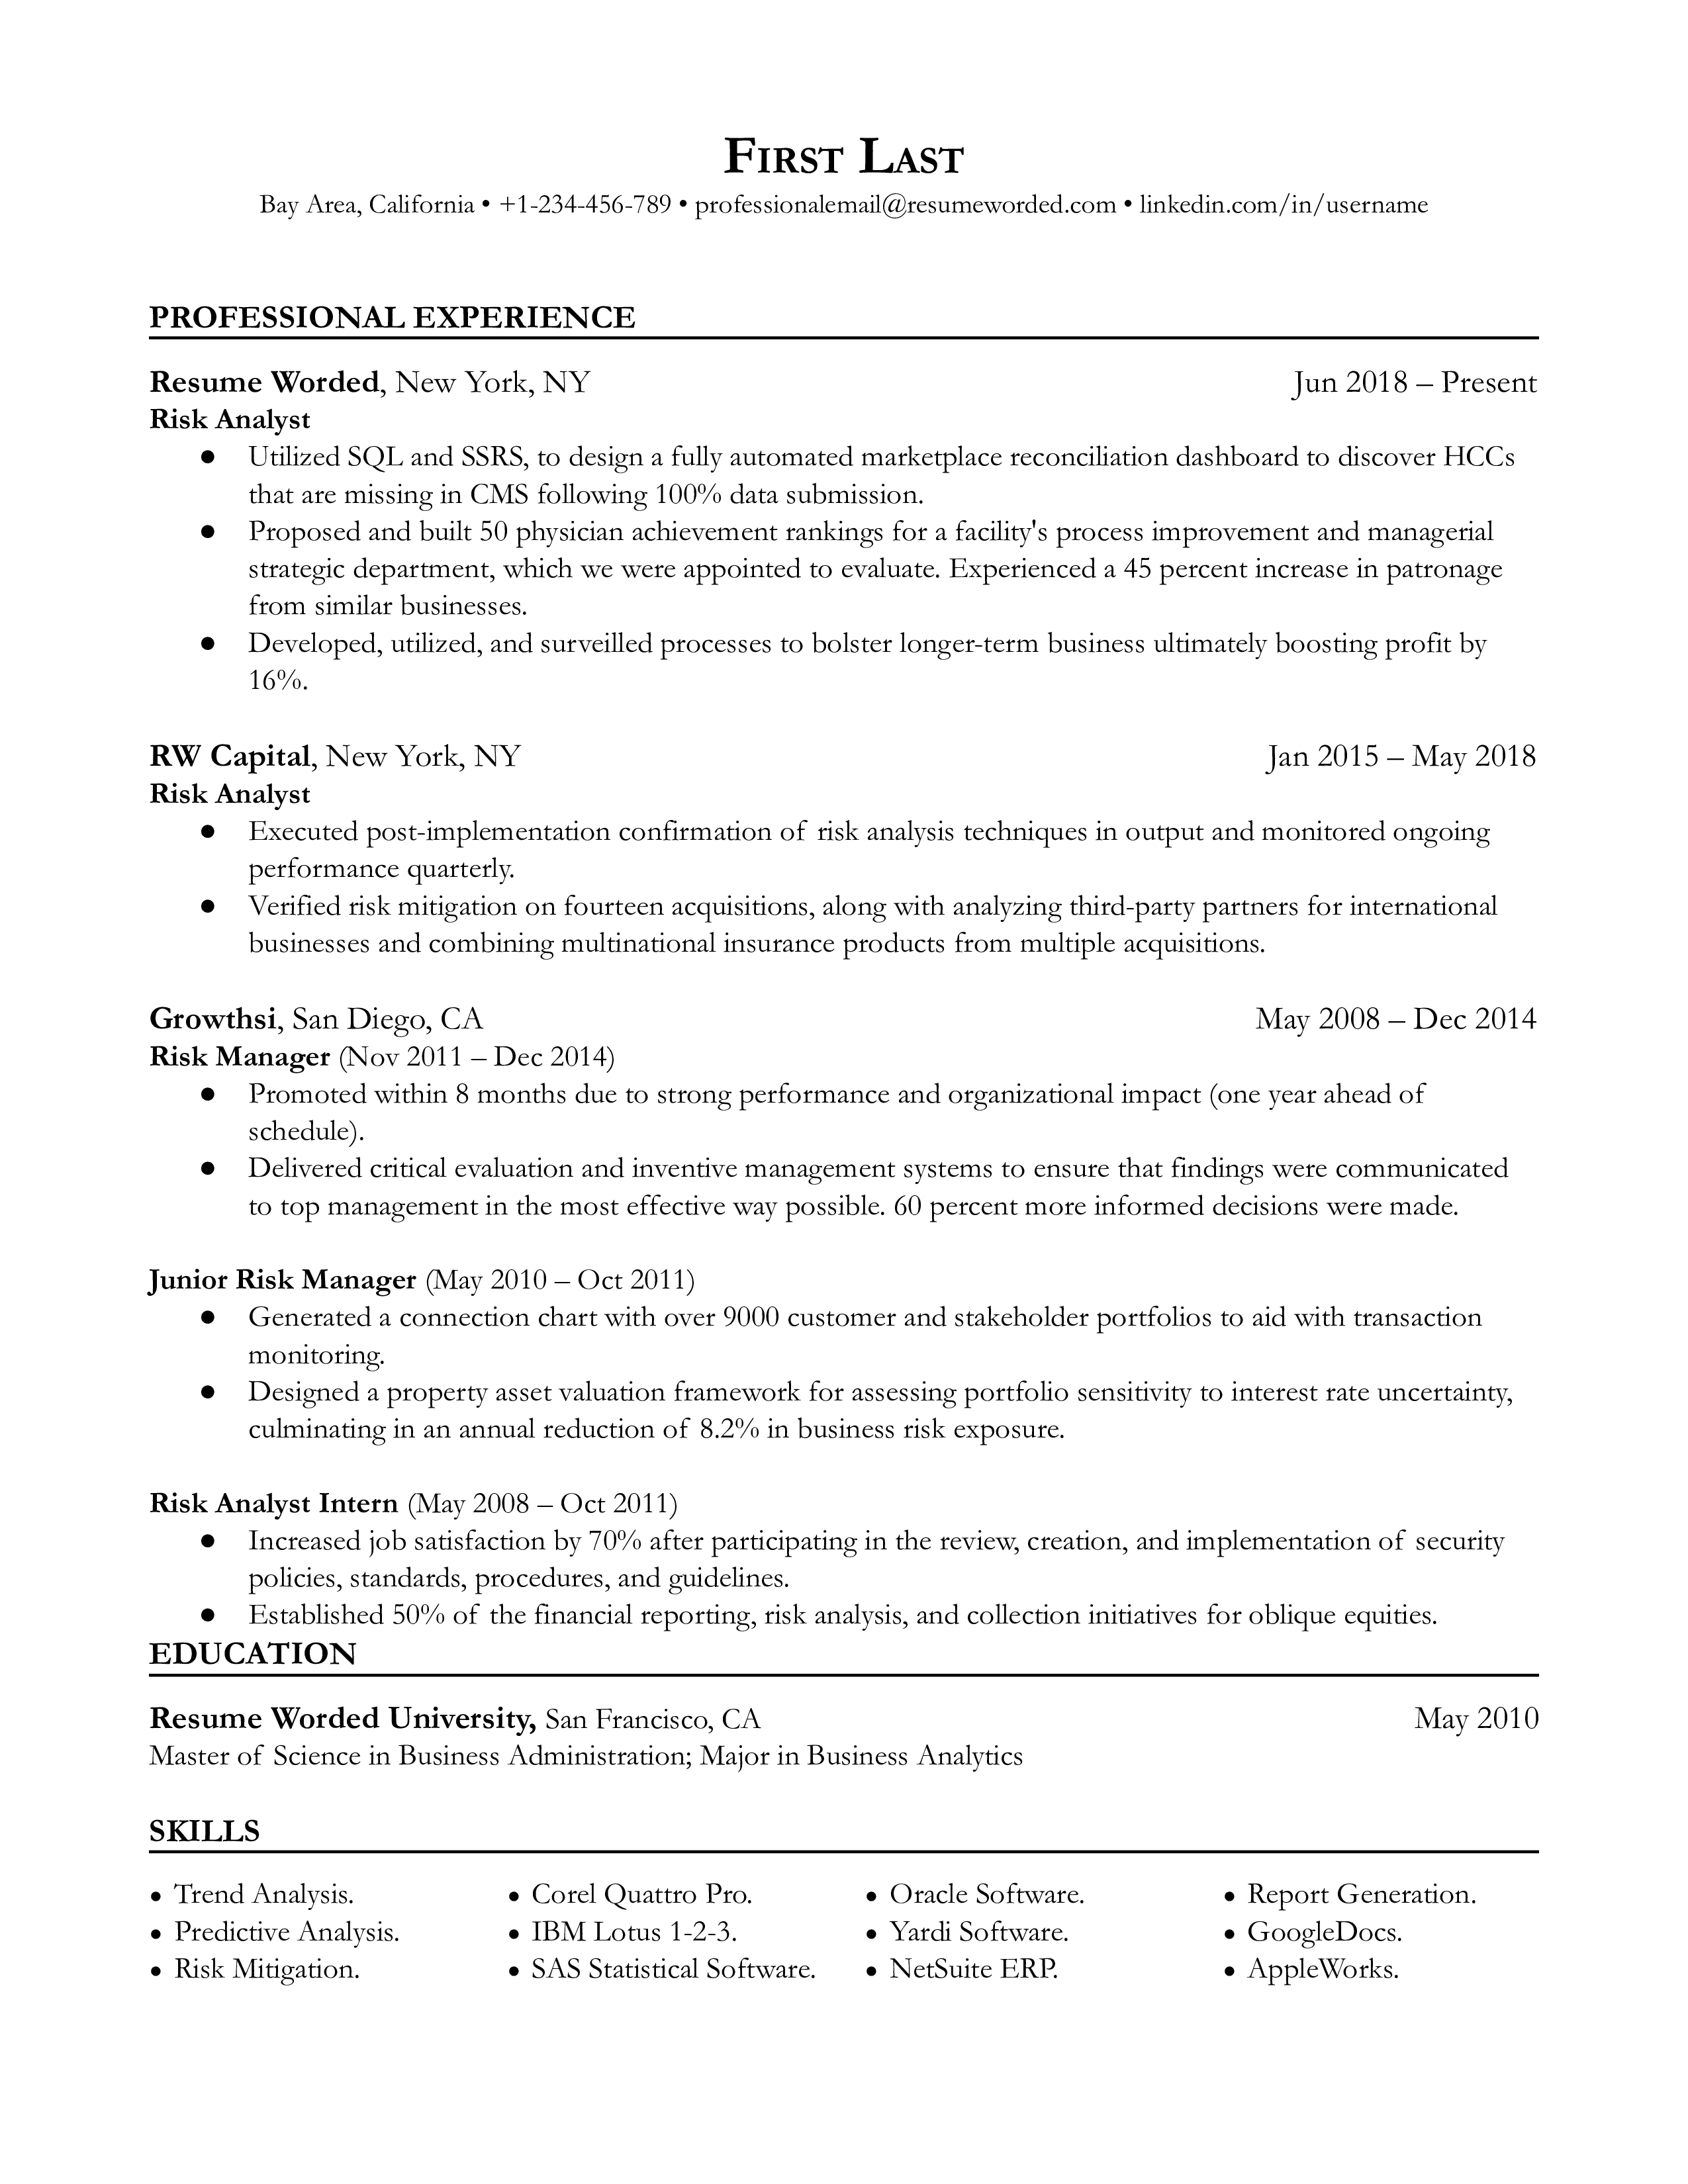 Professional resume for a Risk Analyst highlighting regulatory knowledge and data analysis skills.